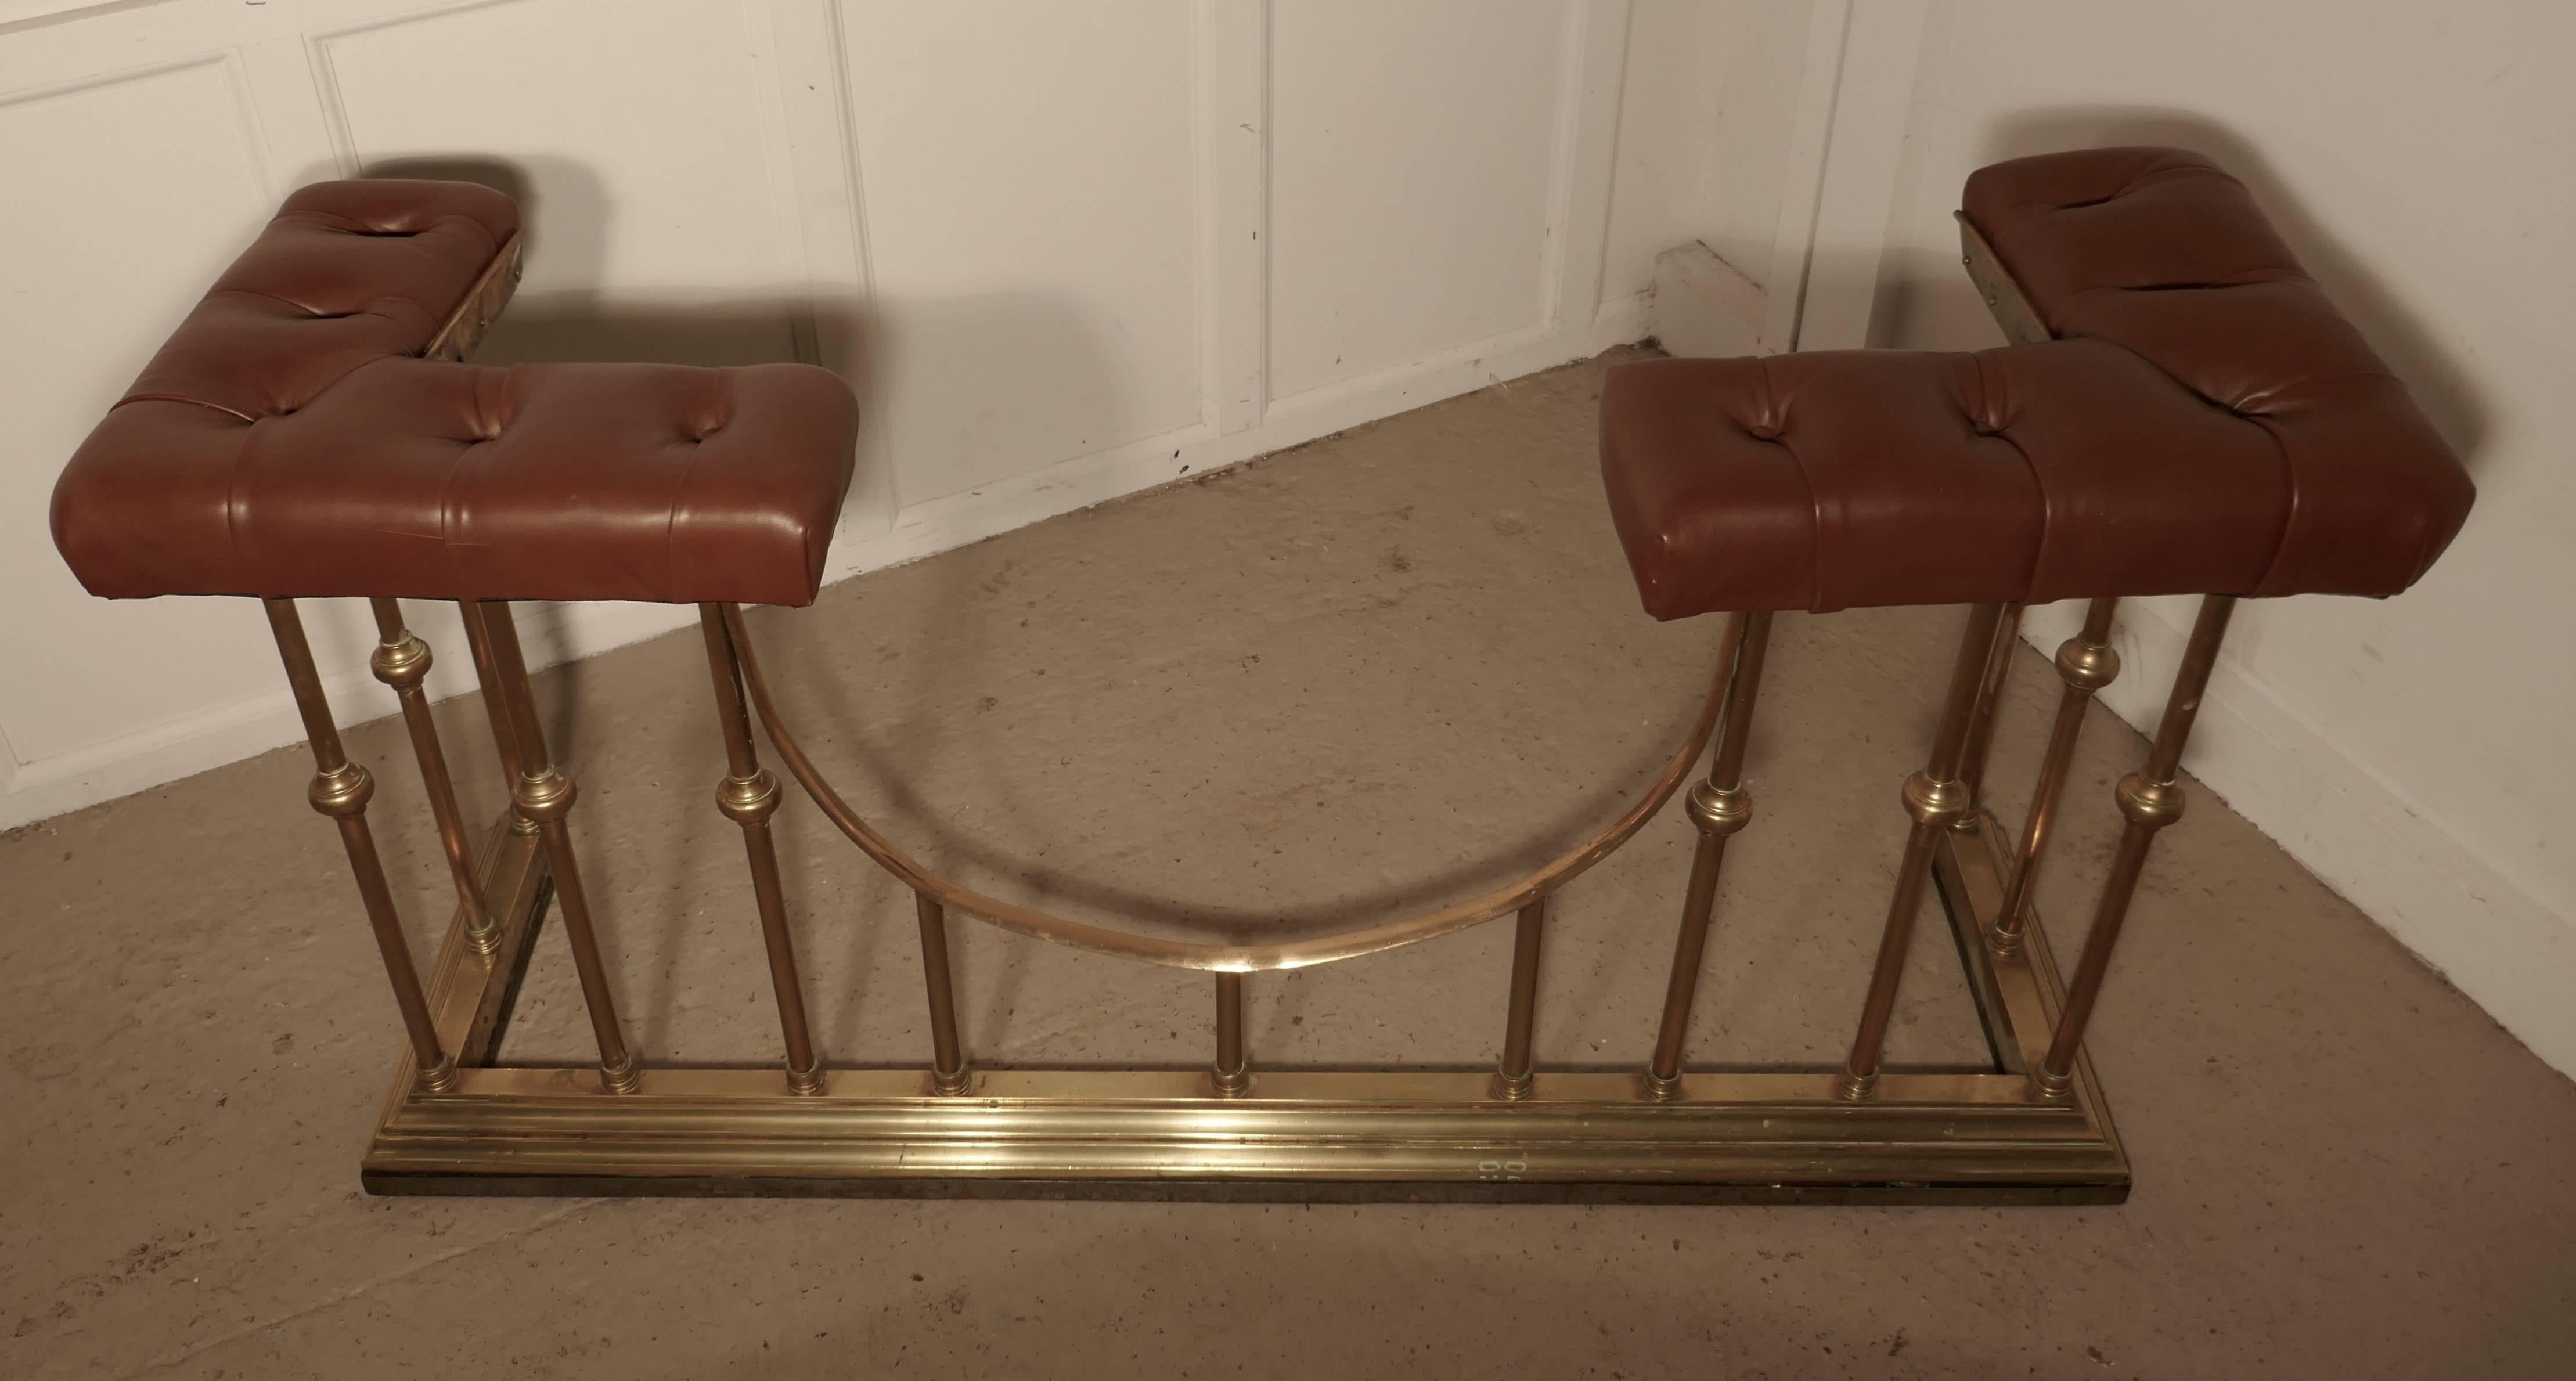 This tall and elegant piece of country house furniture and larger than most of this type, the brass fender has chunky turned uprights and seats with deeply buttoned brown leather covering
The fender is in good condition, and the seat is just the